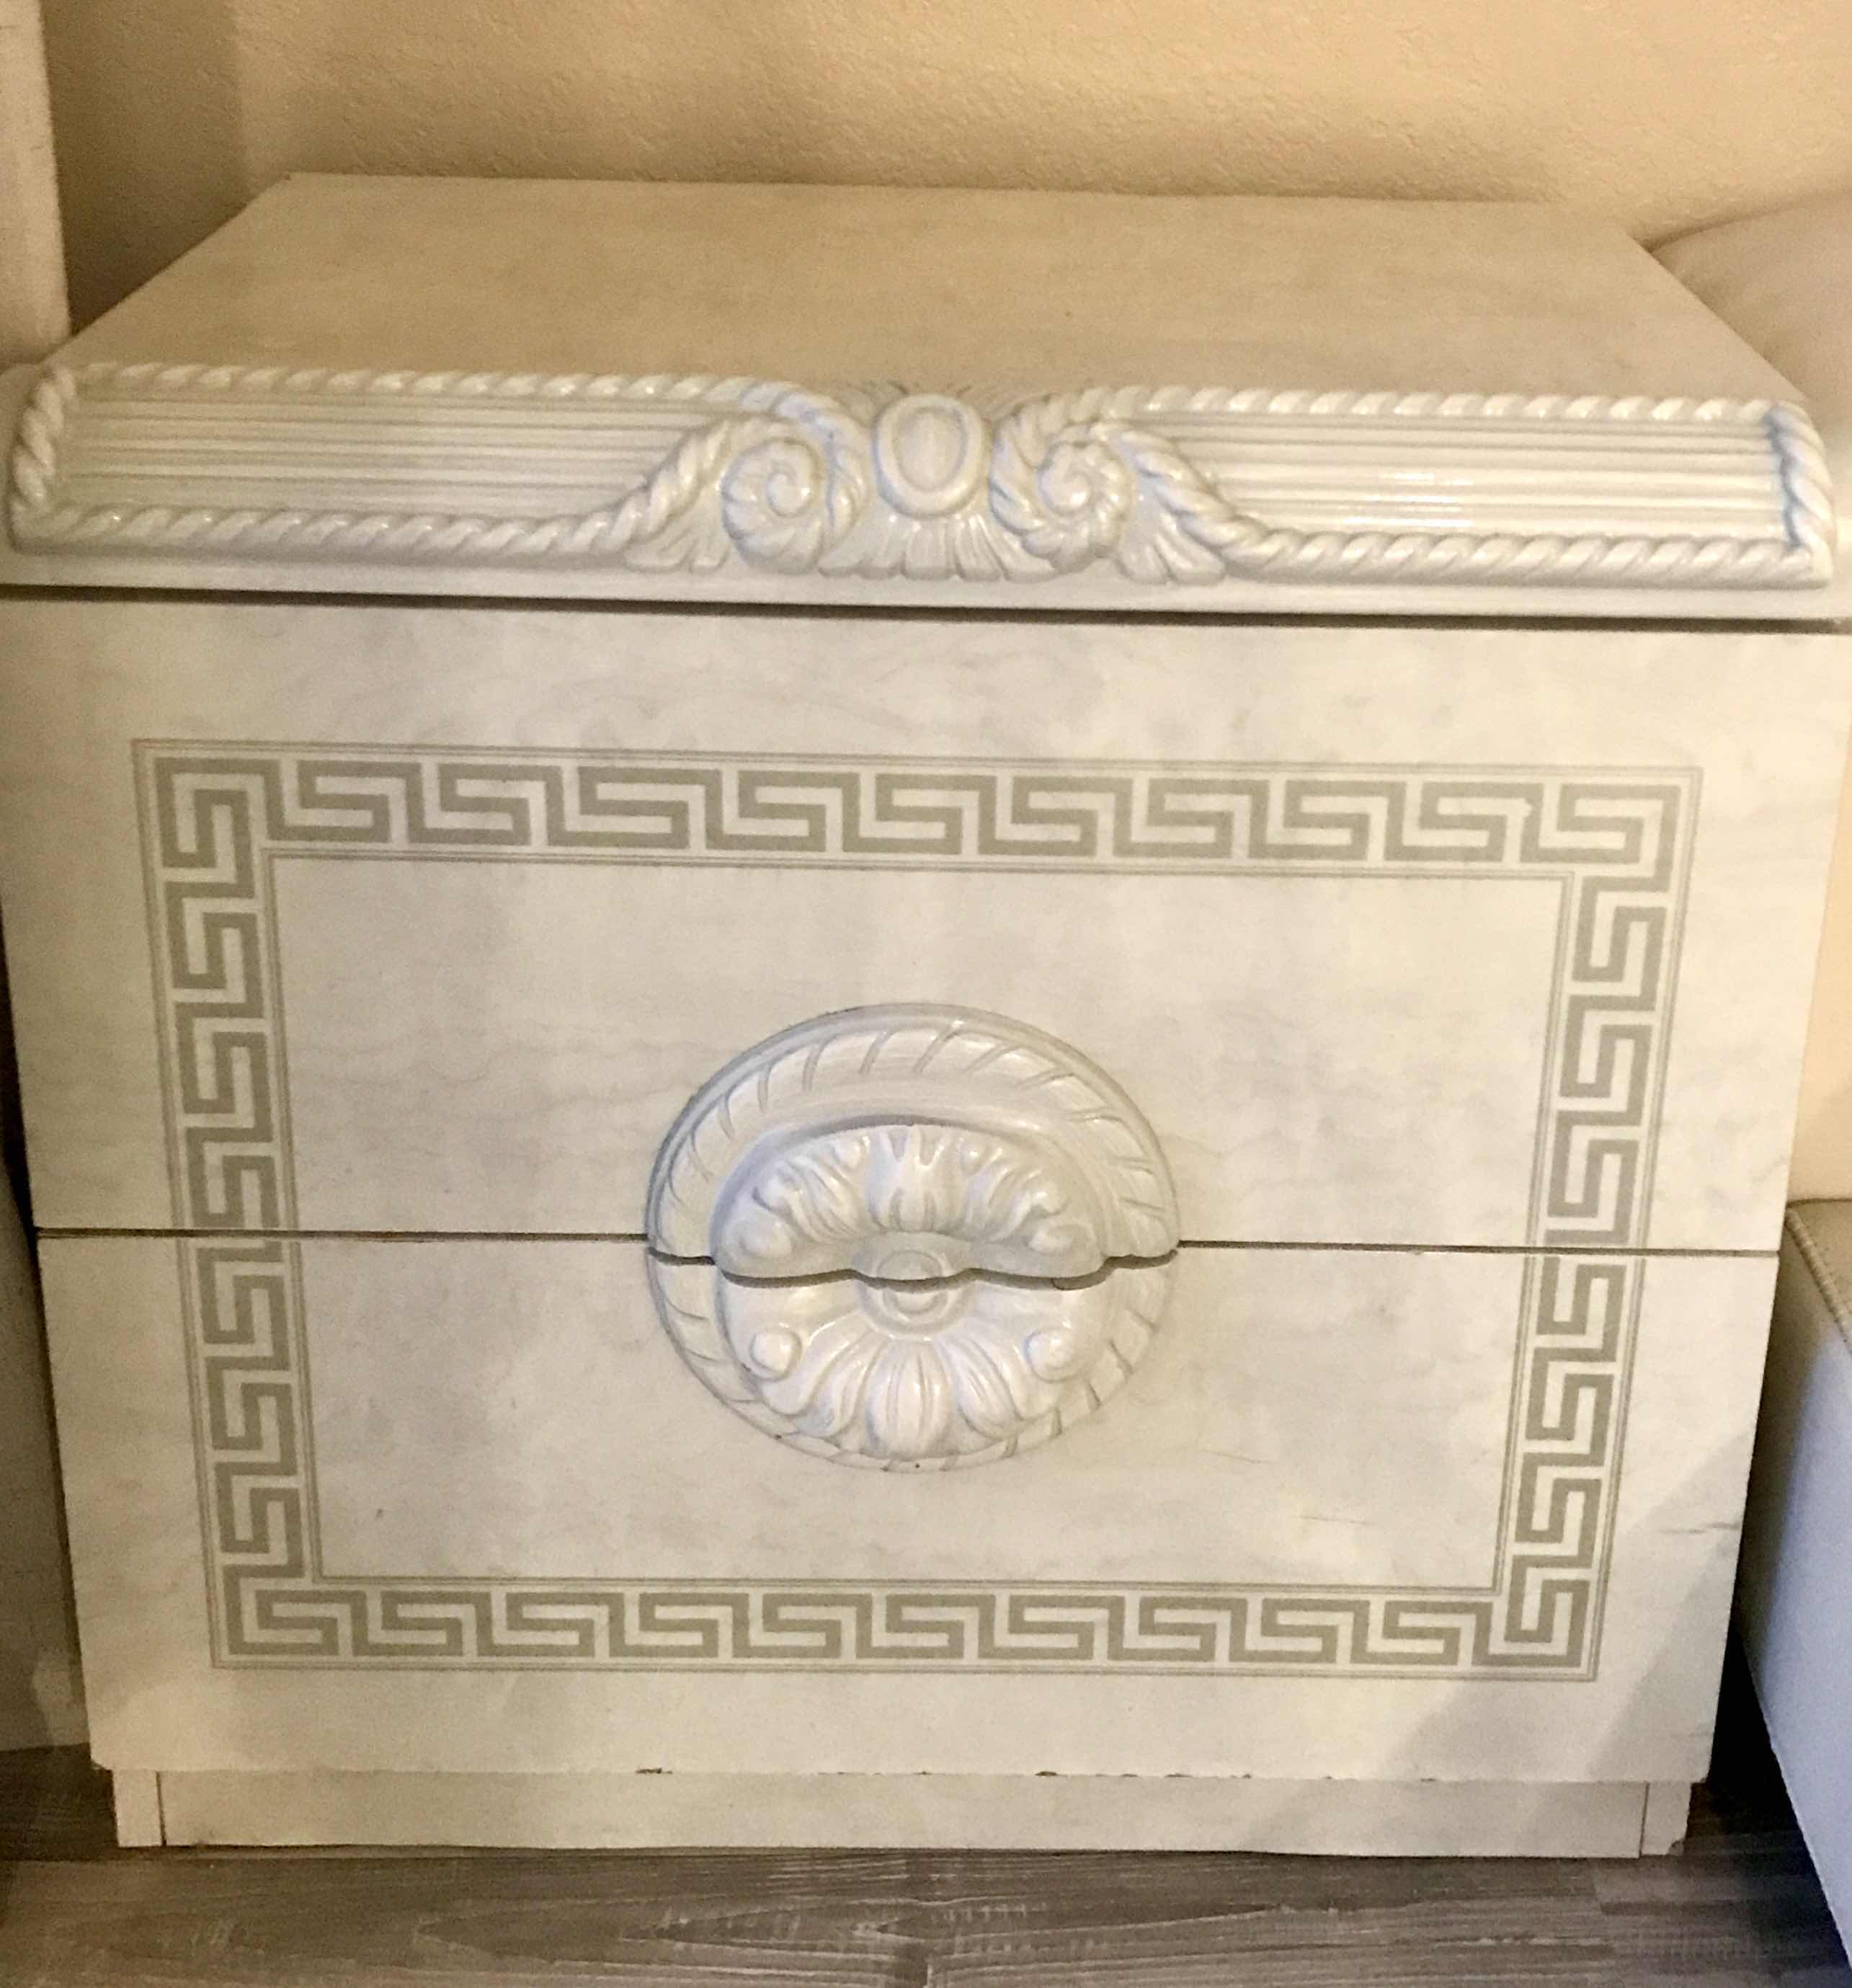 Photo 1 of ITALIAN ORNATE BEDSIDE TABLE - 25.5 X 16 X 24
MORE OF THIS IN AUCTION